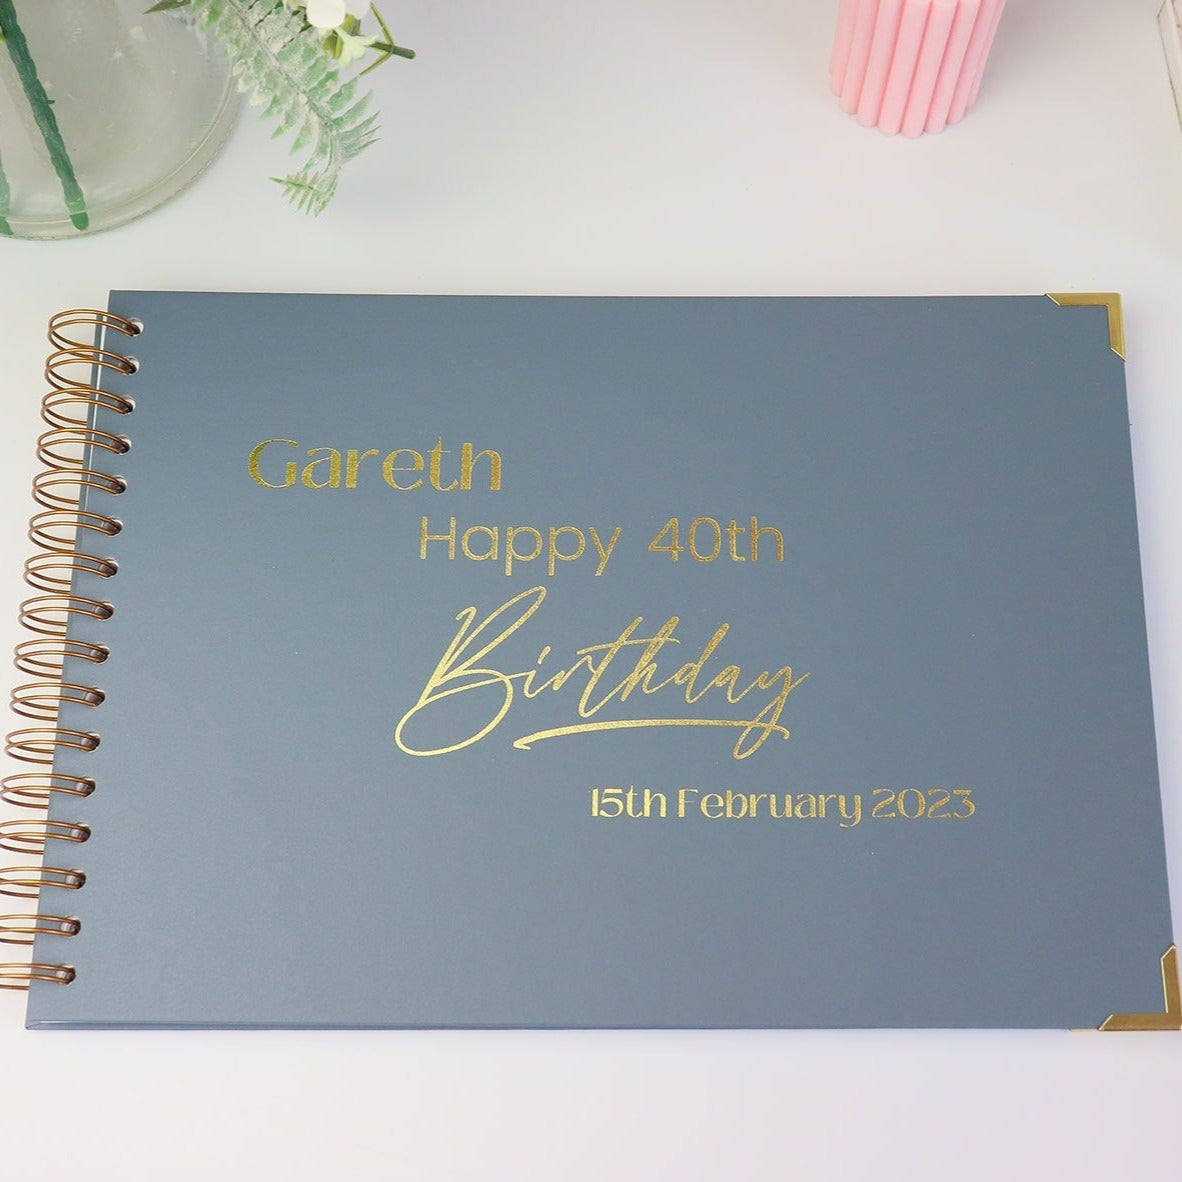 An A4 blue/grey memory book that says 'Gareth Happy 40th Birthday 15 February 2023' in gold foil